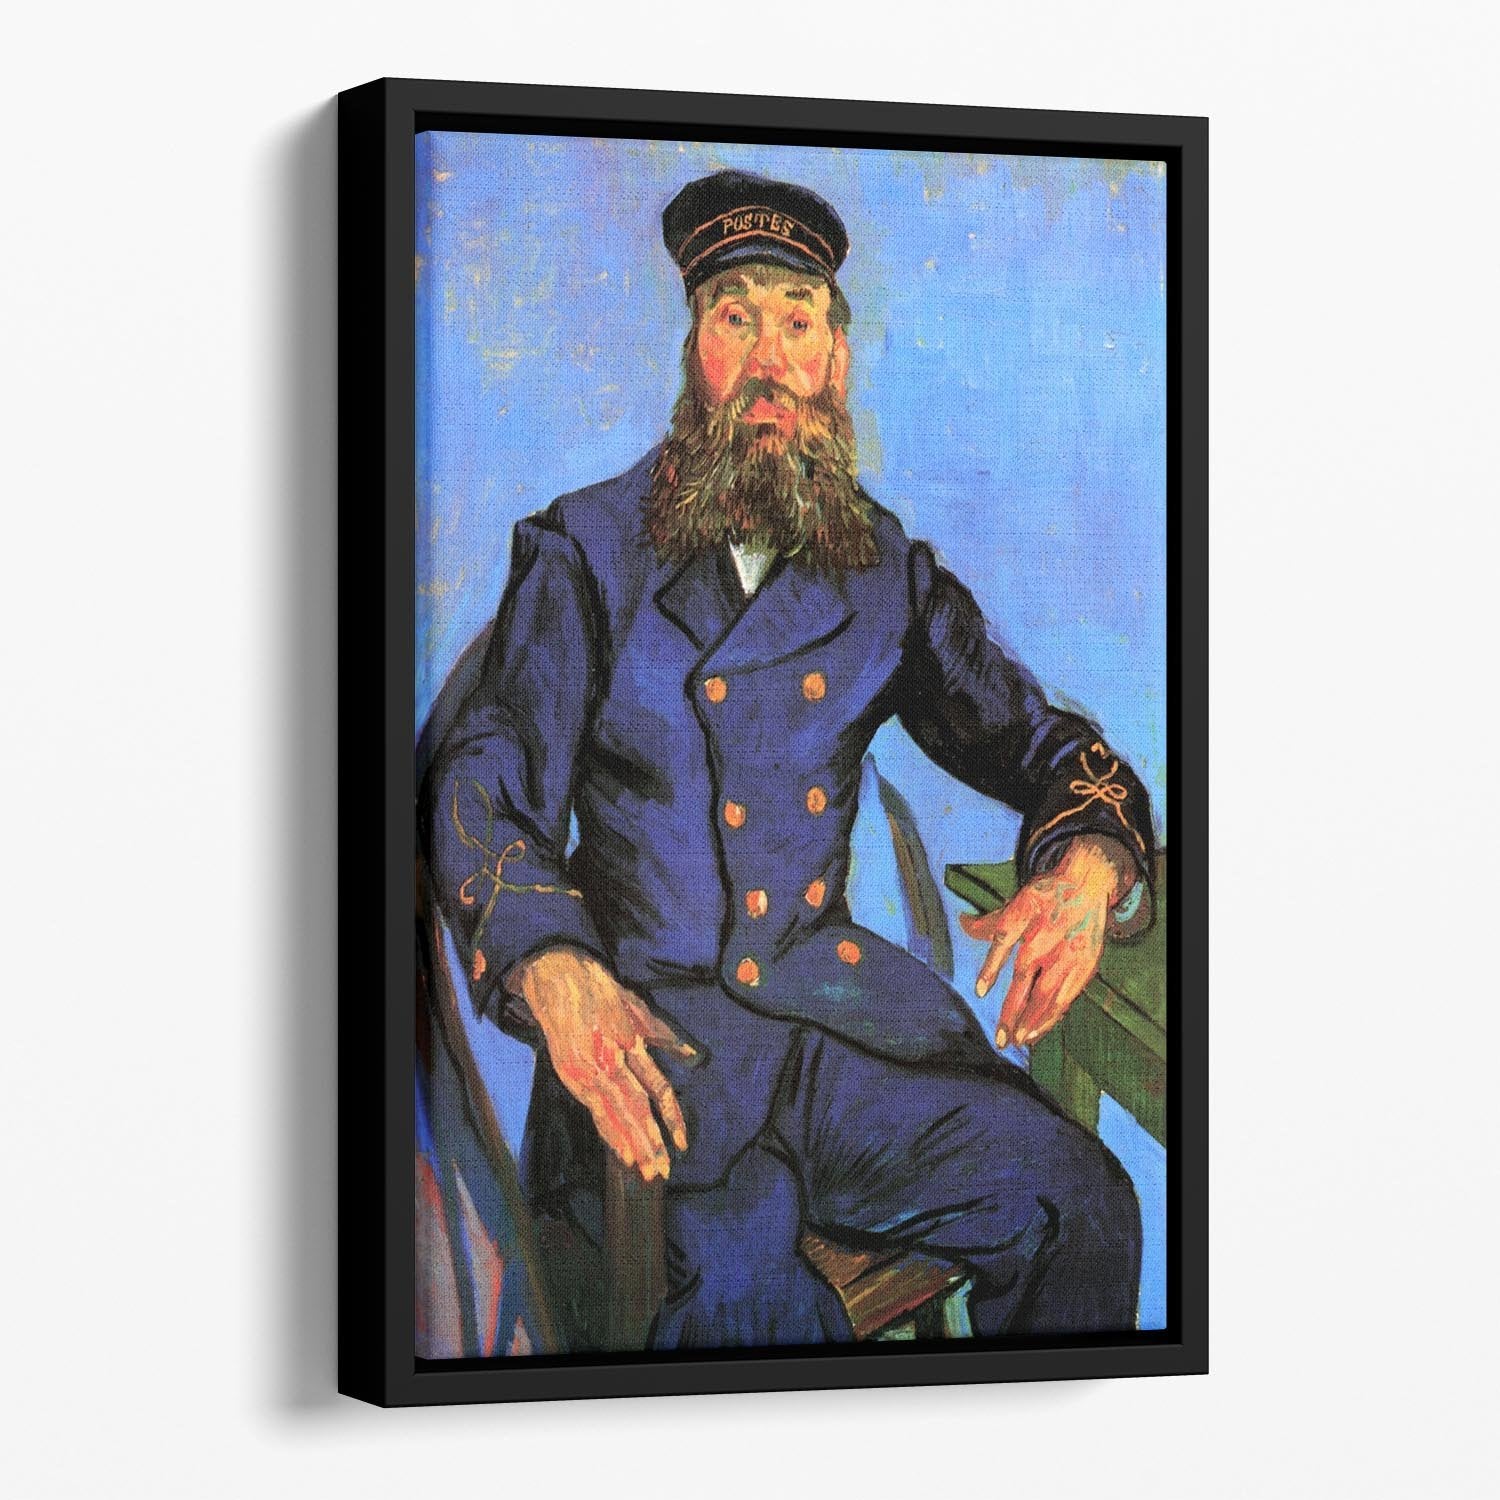 Portrait of the Postman Joseph Roulin by Van Gogh Floating Framed Canvas